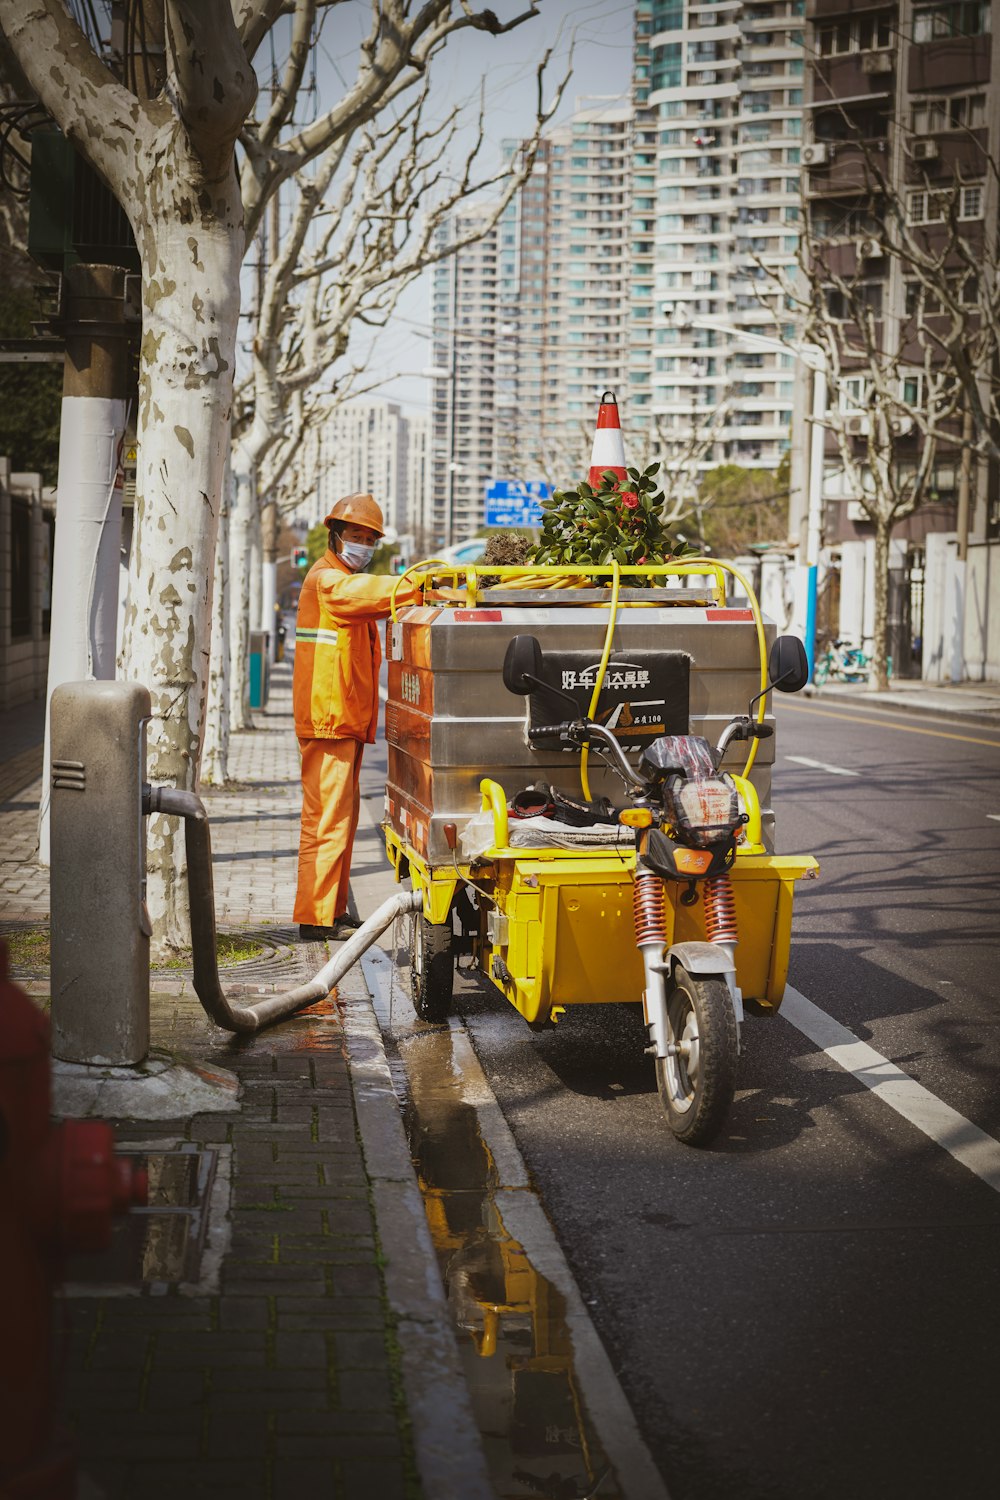 a man in an orange suit is cleaning a street